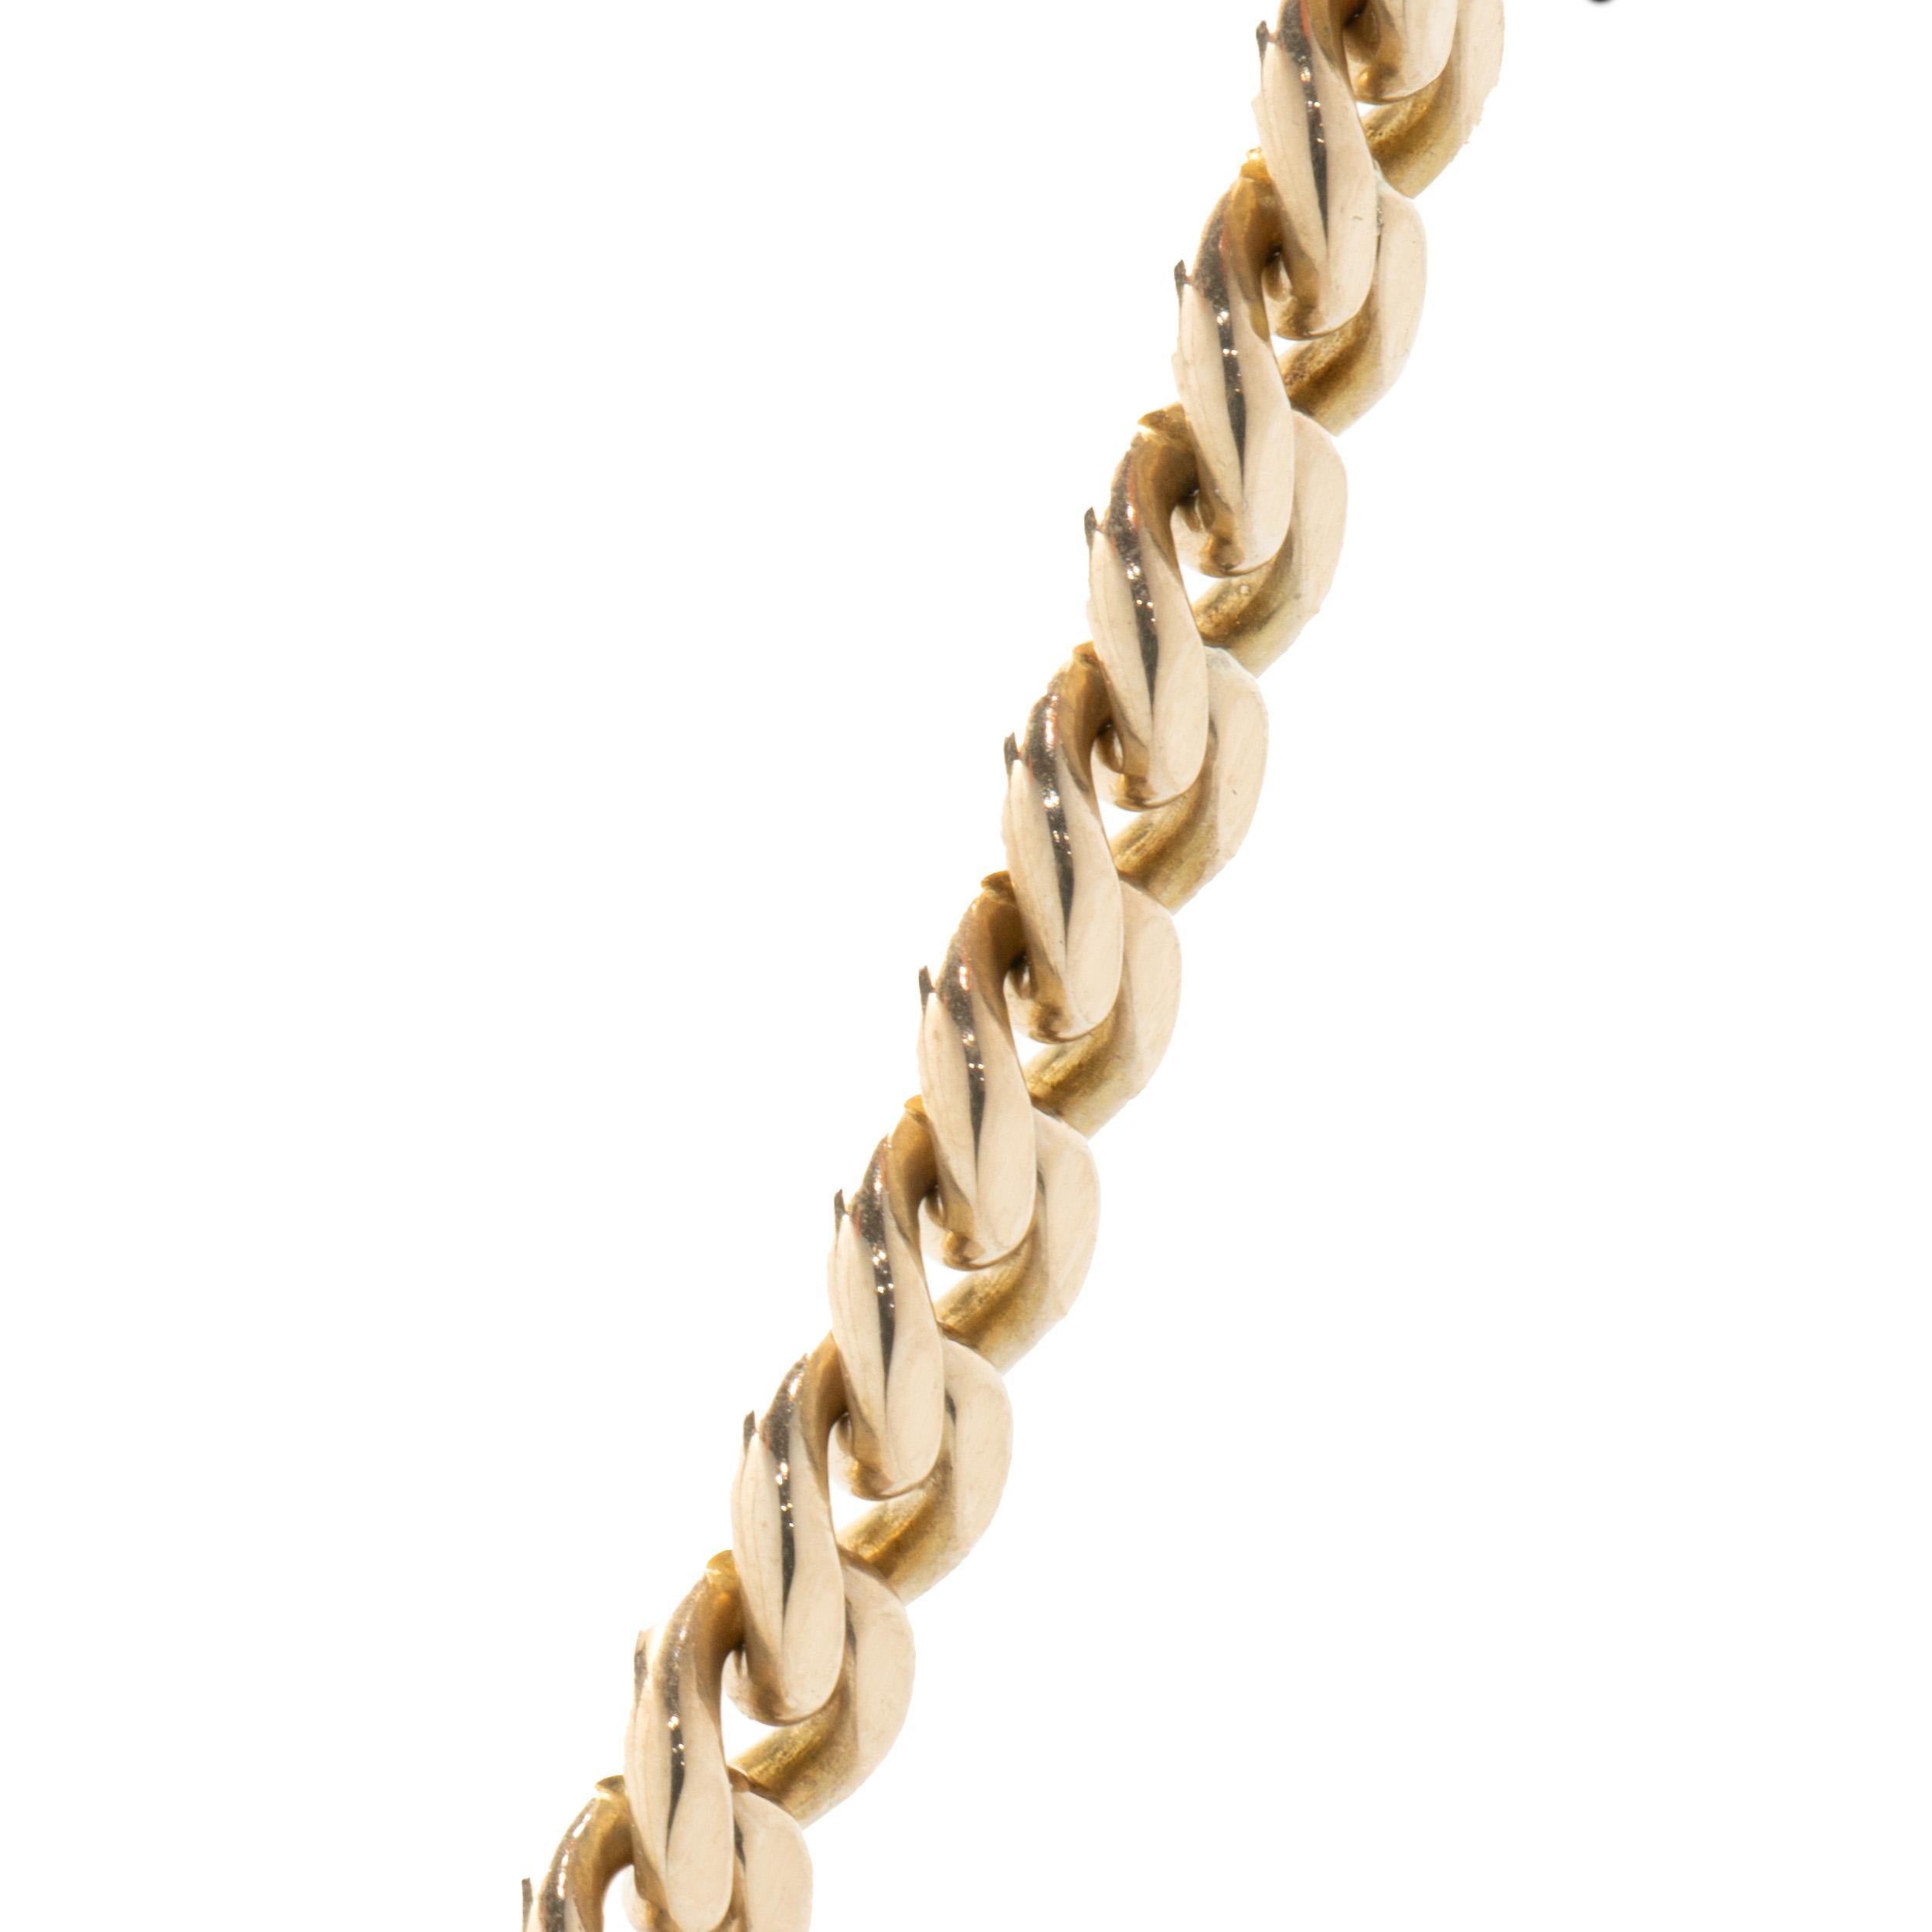 Designer: custom
Material: 14K yellow gold 
Dimensions: necklace measures 24-inches in length
Weight: 45.05 grams